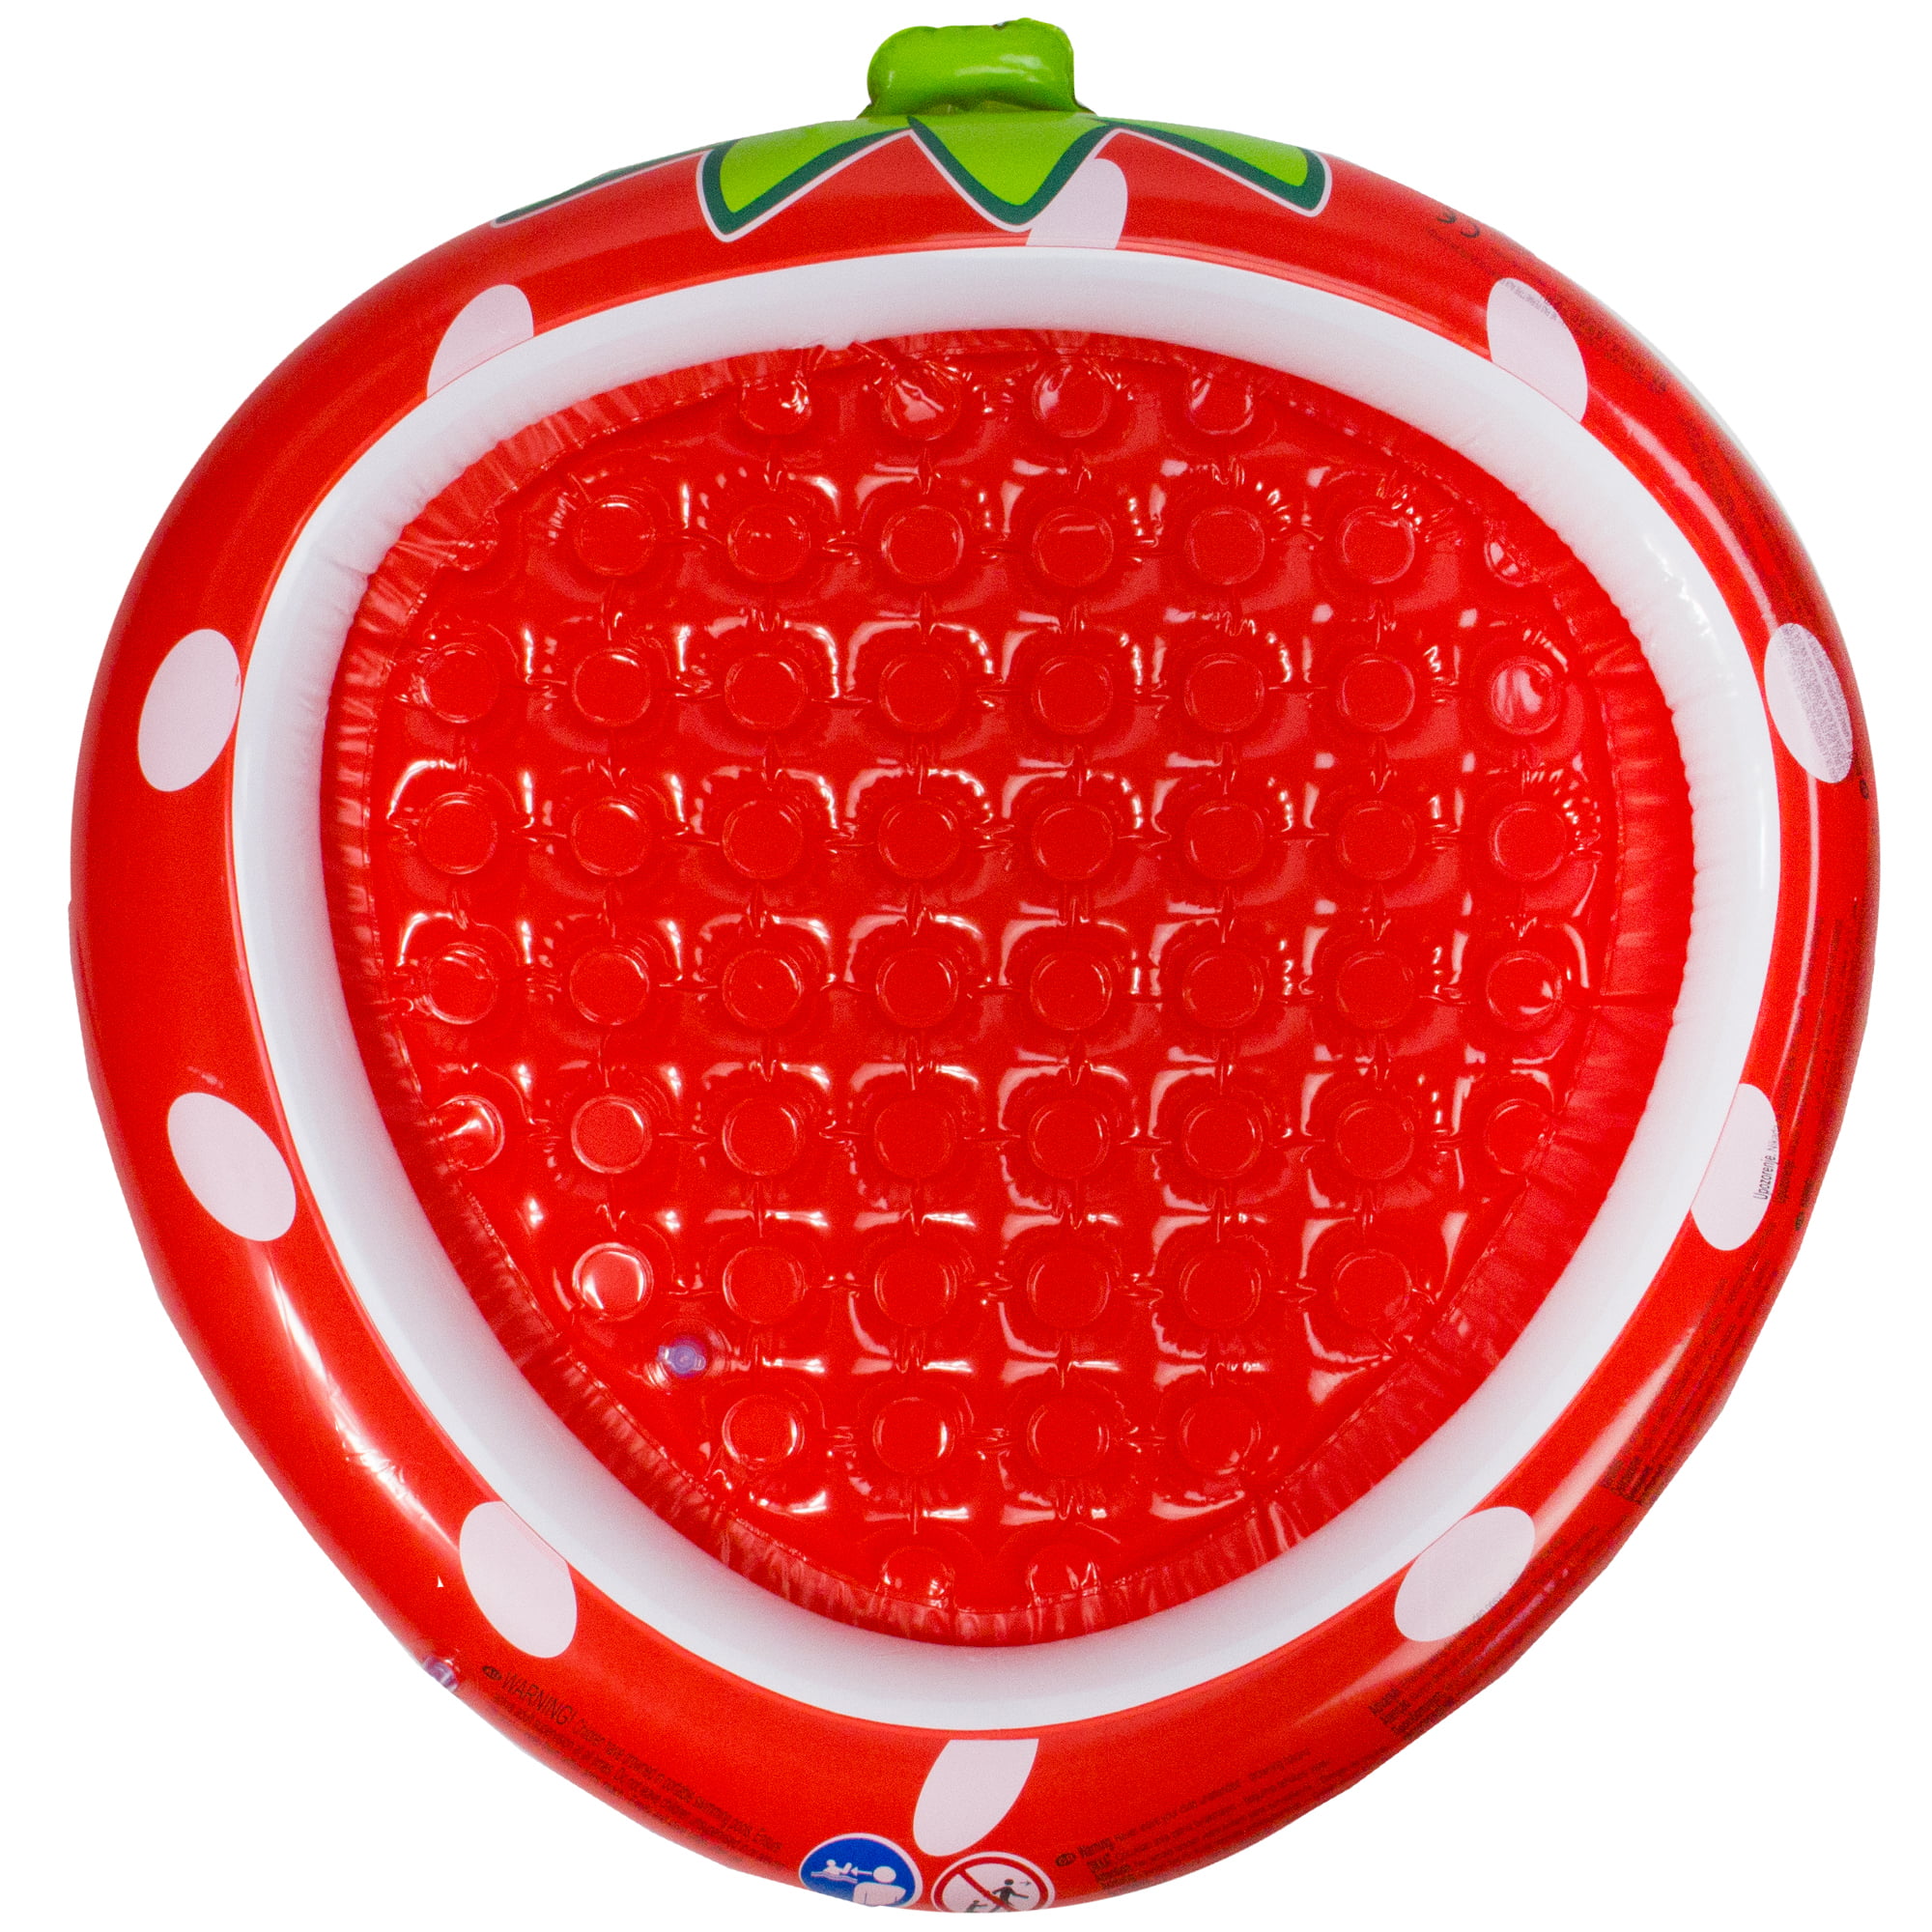 Jilong 57013 Fun Pool Baby Strawberry with Inflatable Base Red